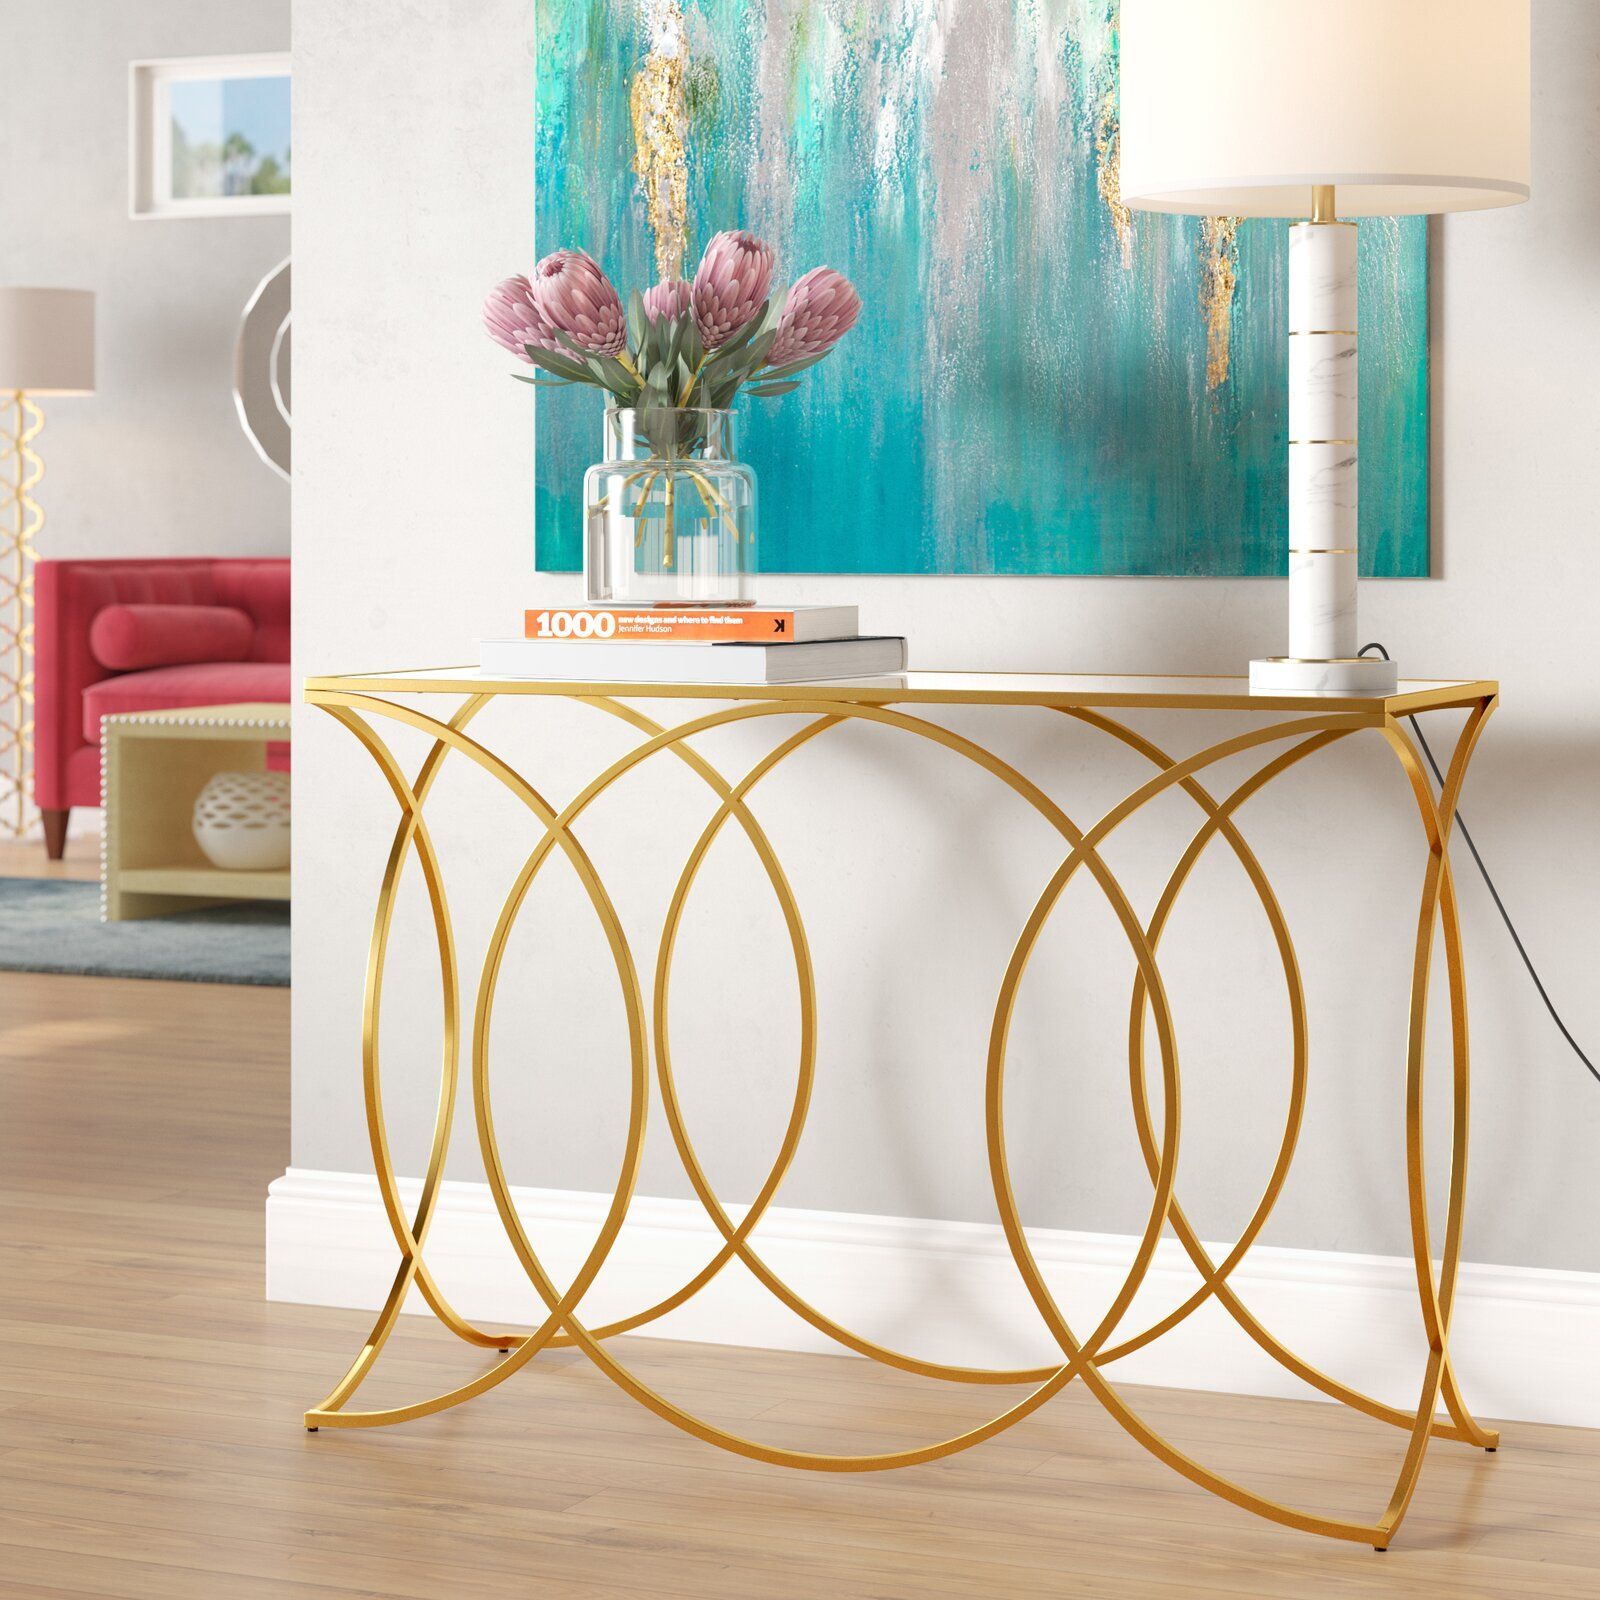 Edgware Geometric Console Table In 2020 | Console Table, Wood Console Regarding Geometric Console Tables (View 3 of 20)